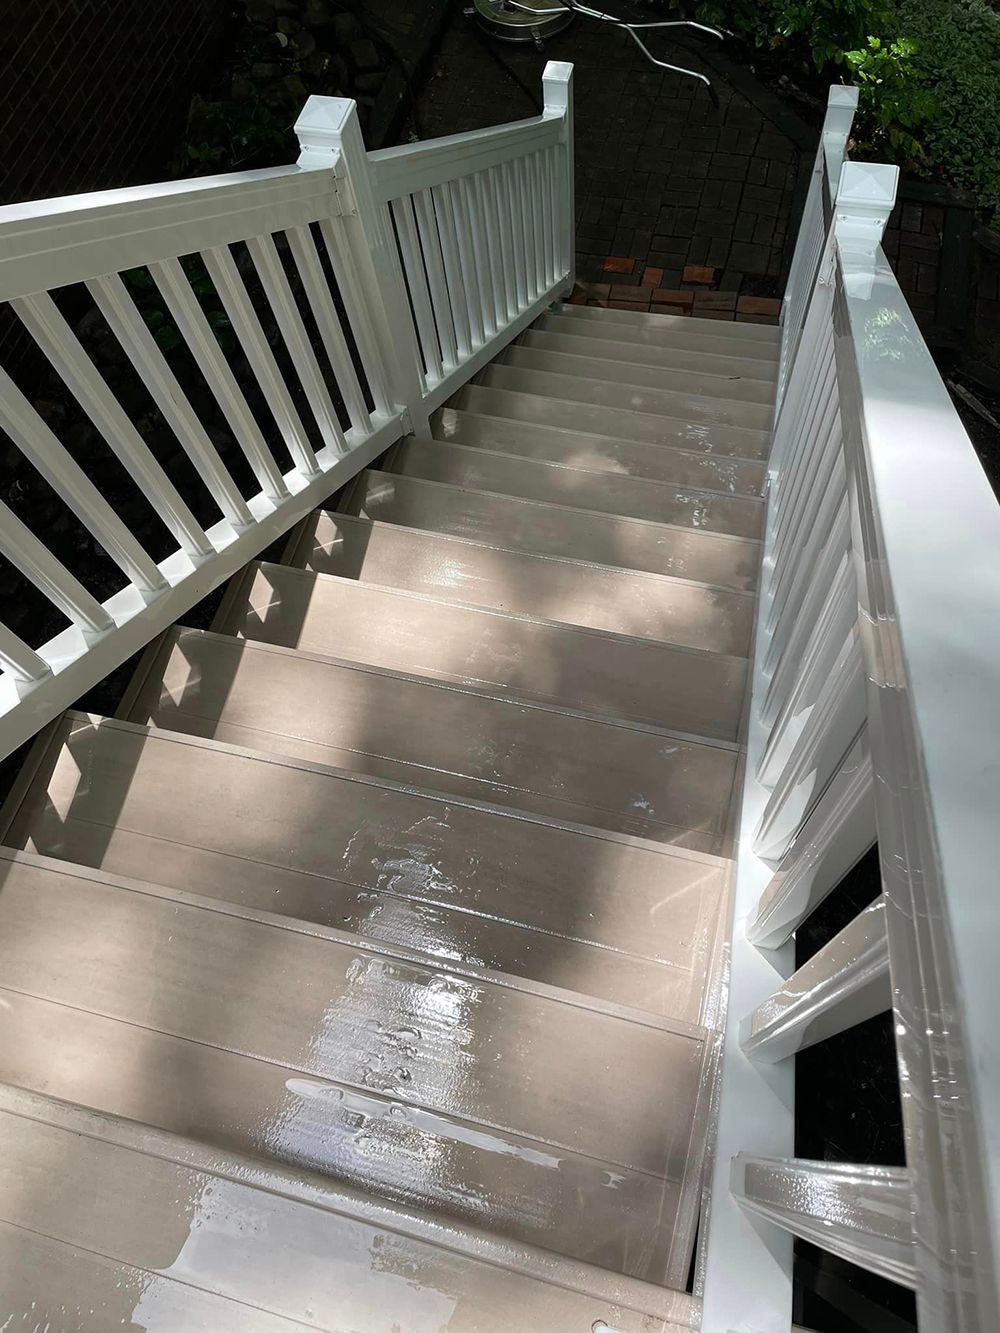 A set of stairs leading up to a deck with a white railing